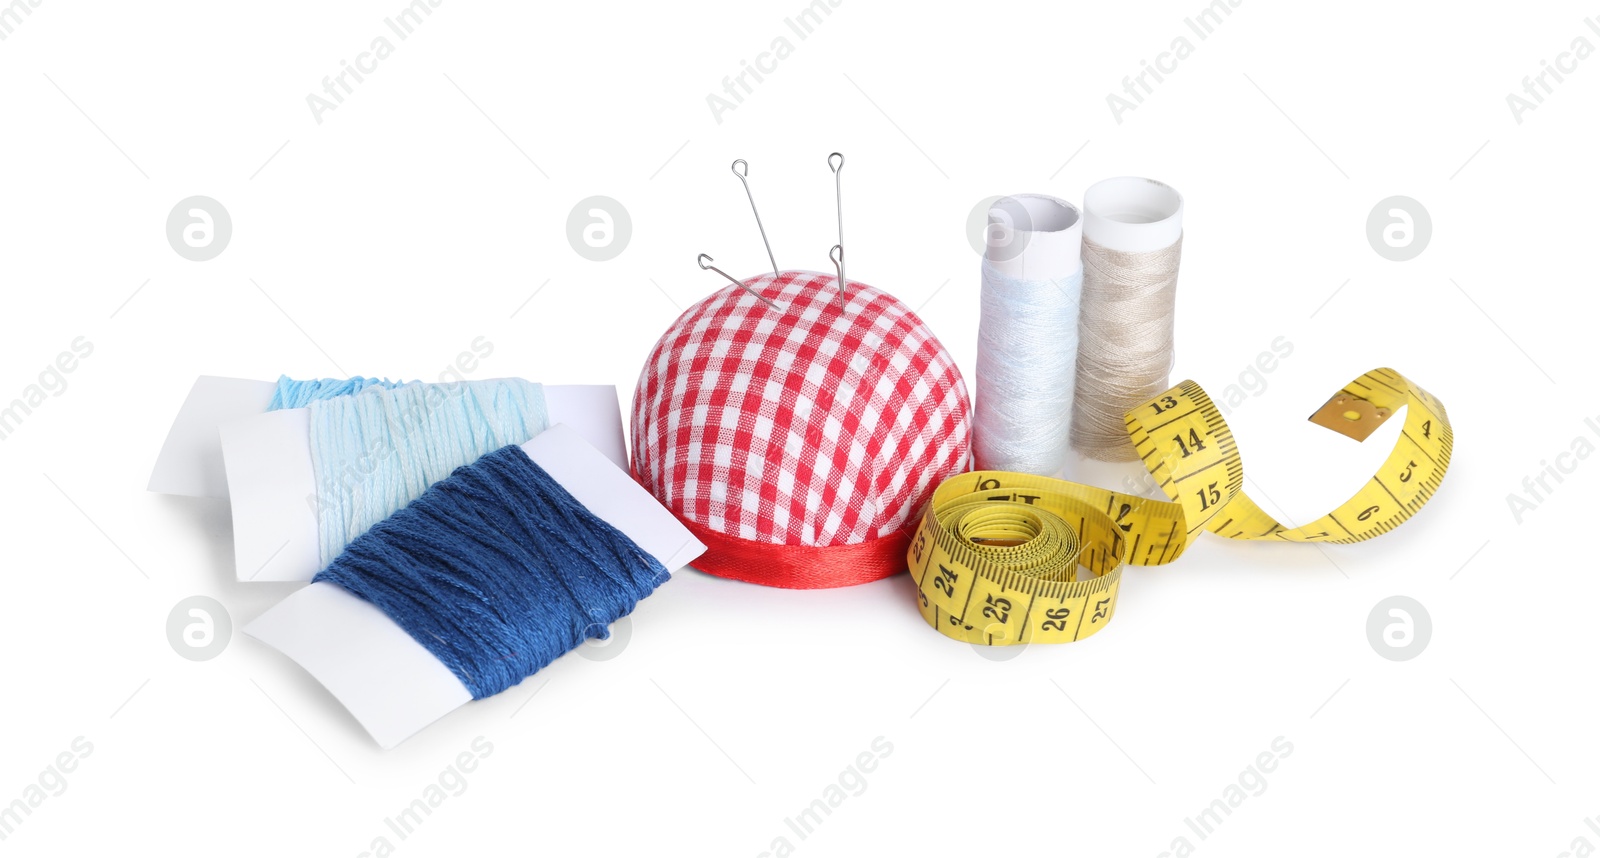 Photo of Pincushion, sewing needles, spools of threads and measuring tape isolated on white